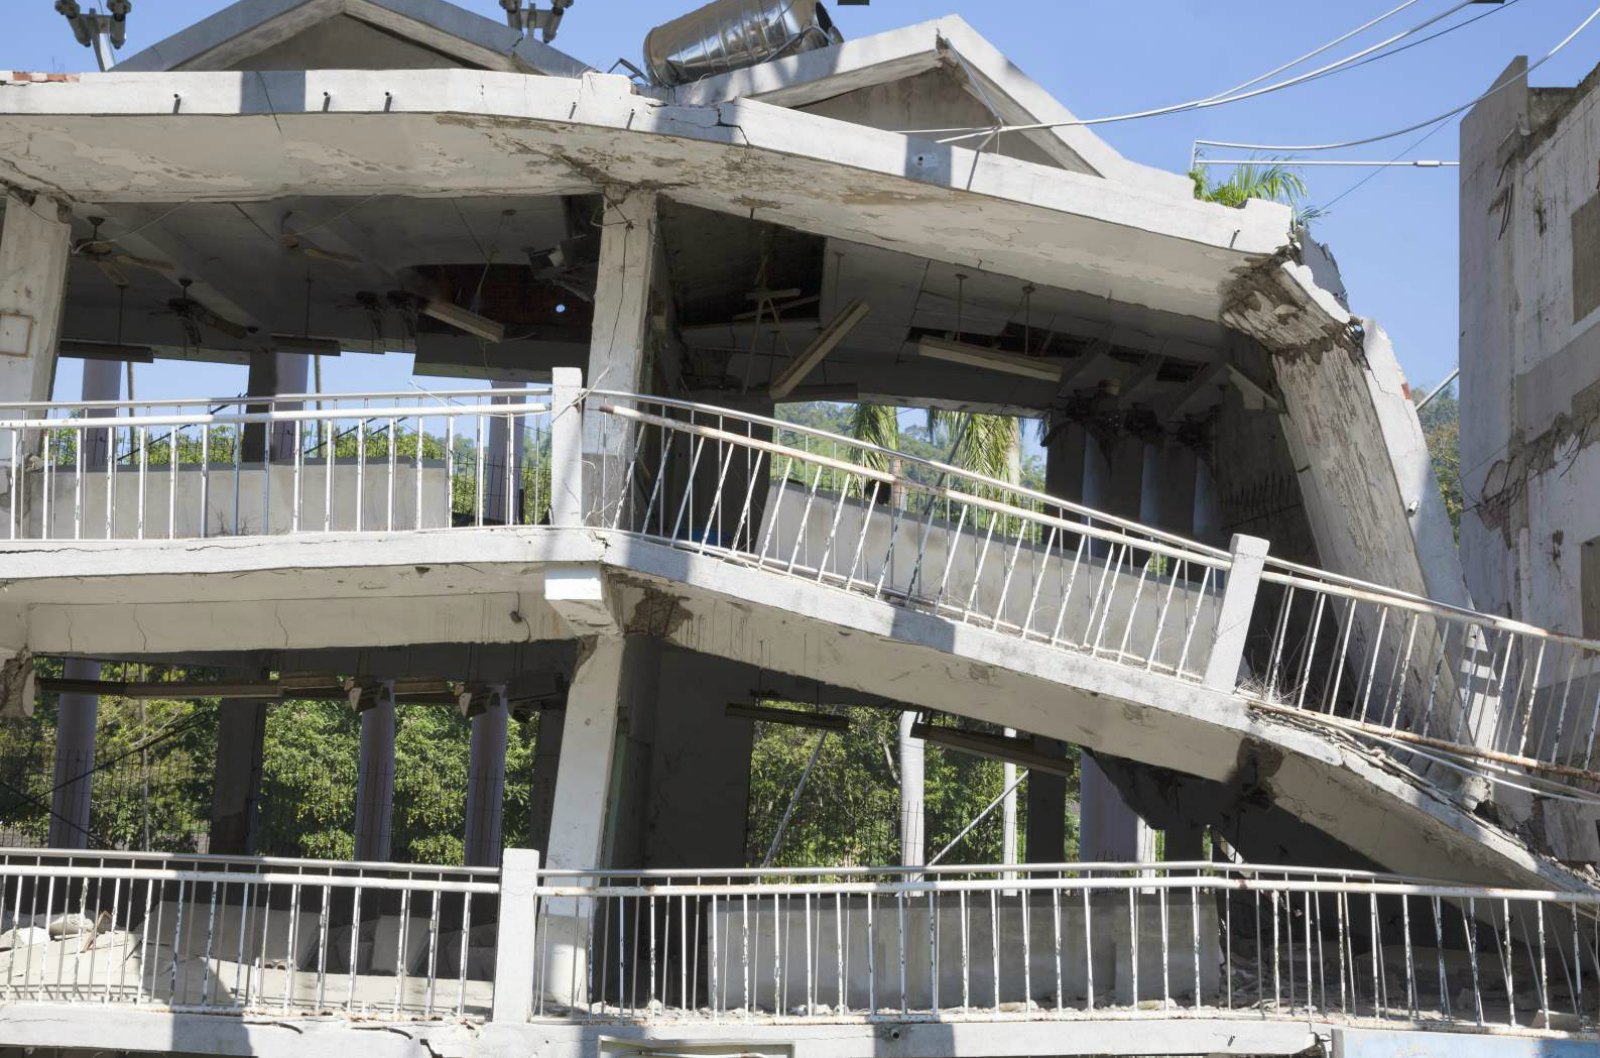 Structural Connections Made Three Times More Resistant to Earthquake Destruction